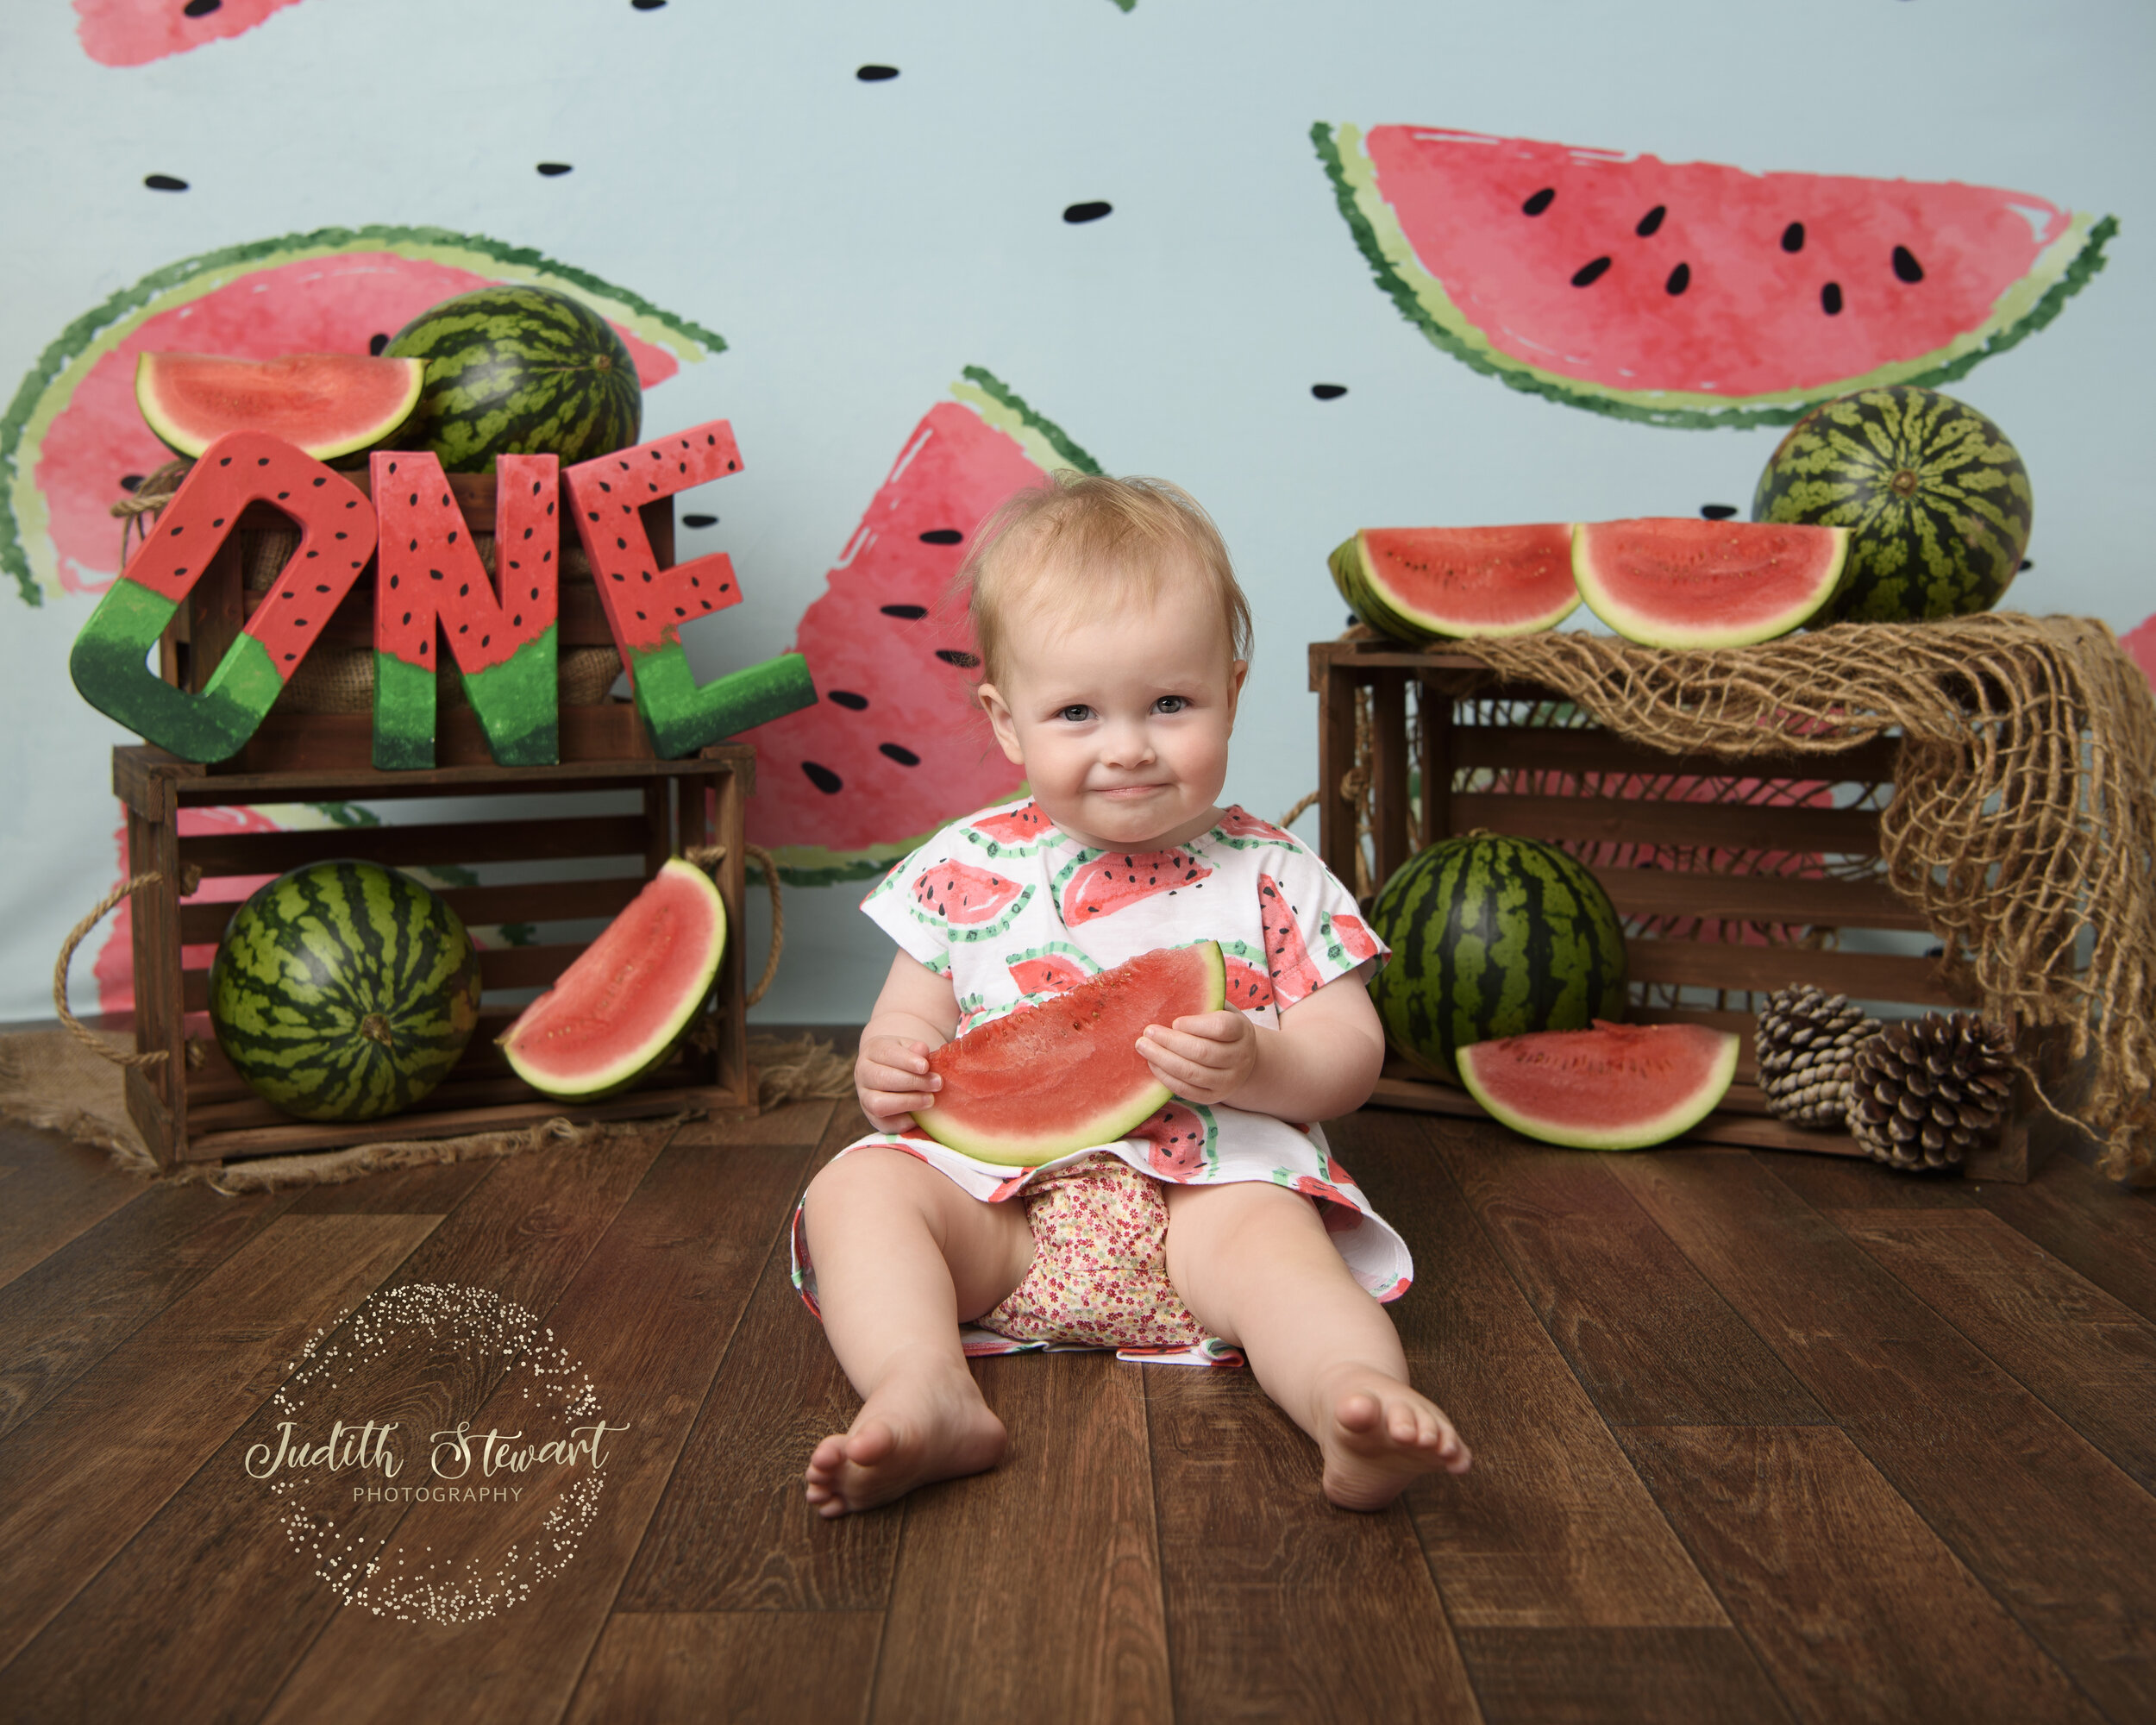 Messy Melon by Judith Stewart Photography